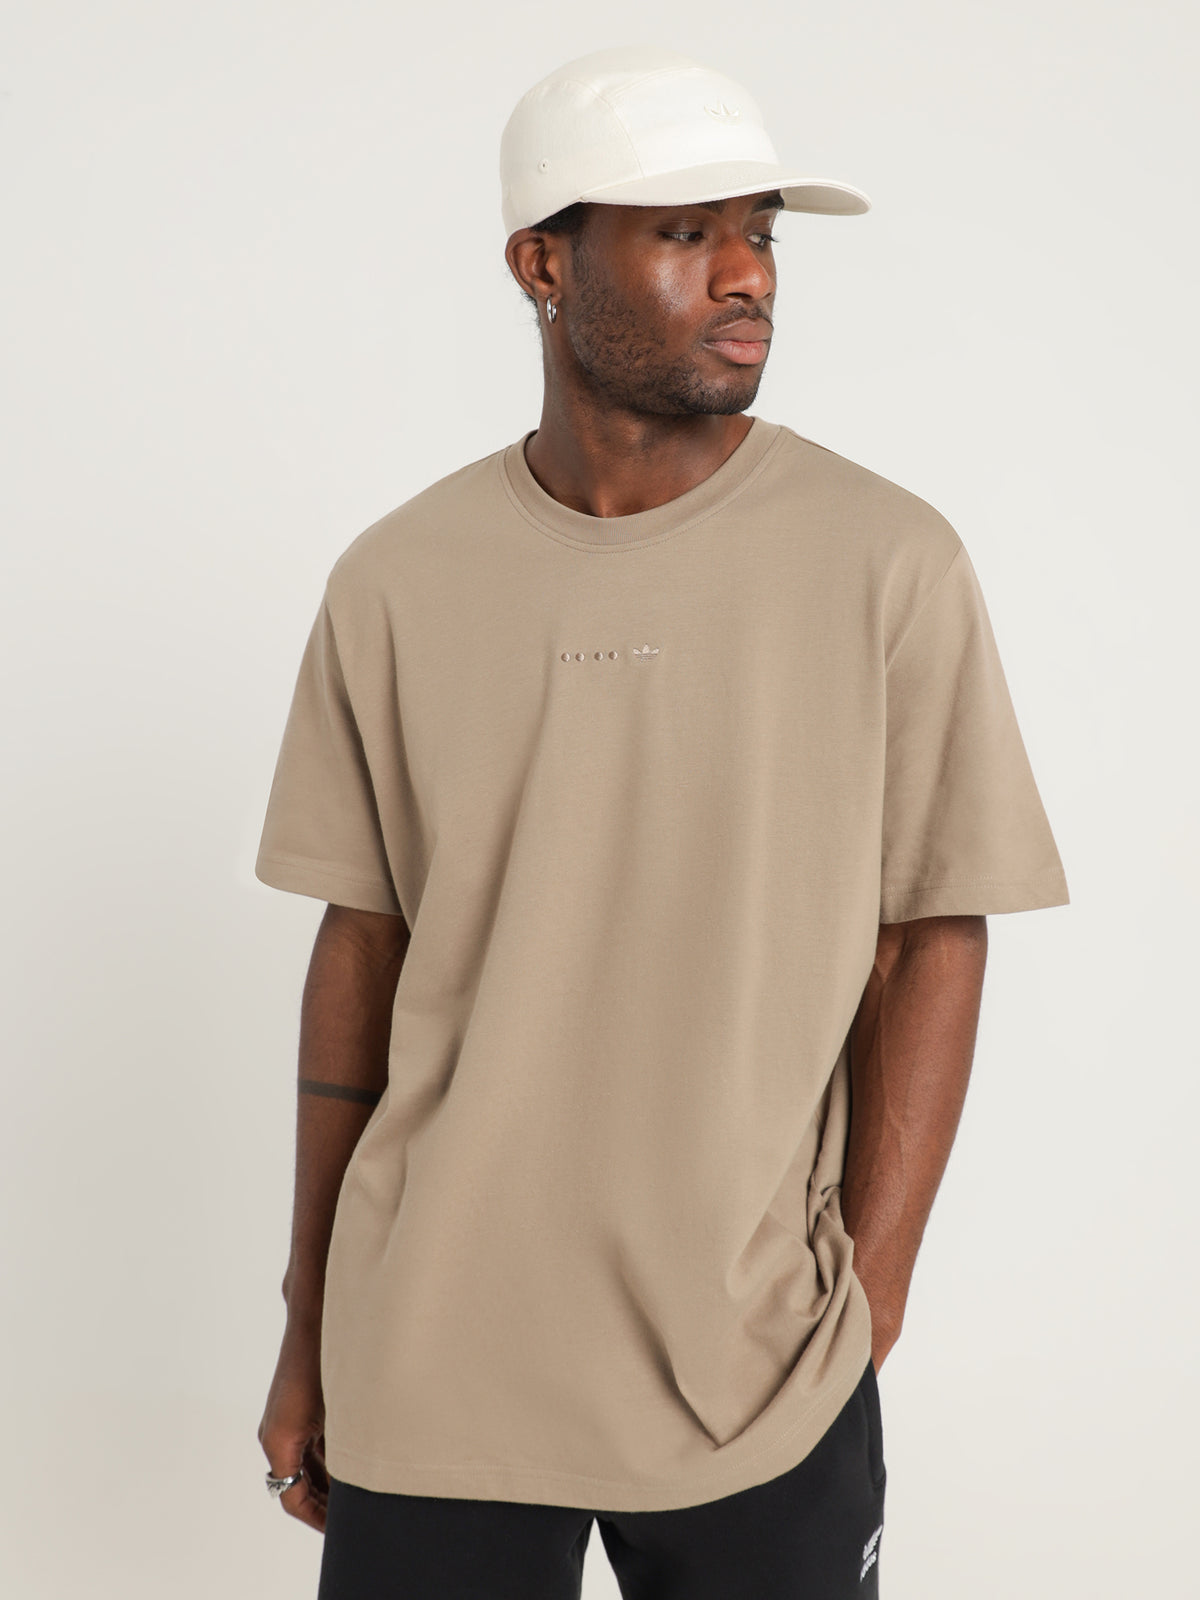 Reveal Essentials T-Shirt in Chalky Brown